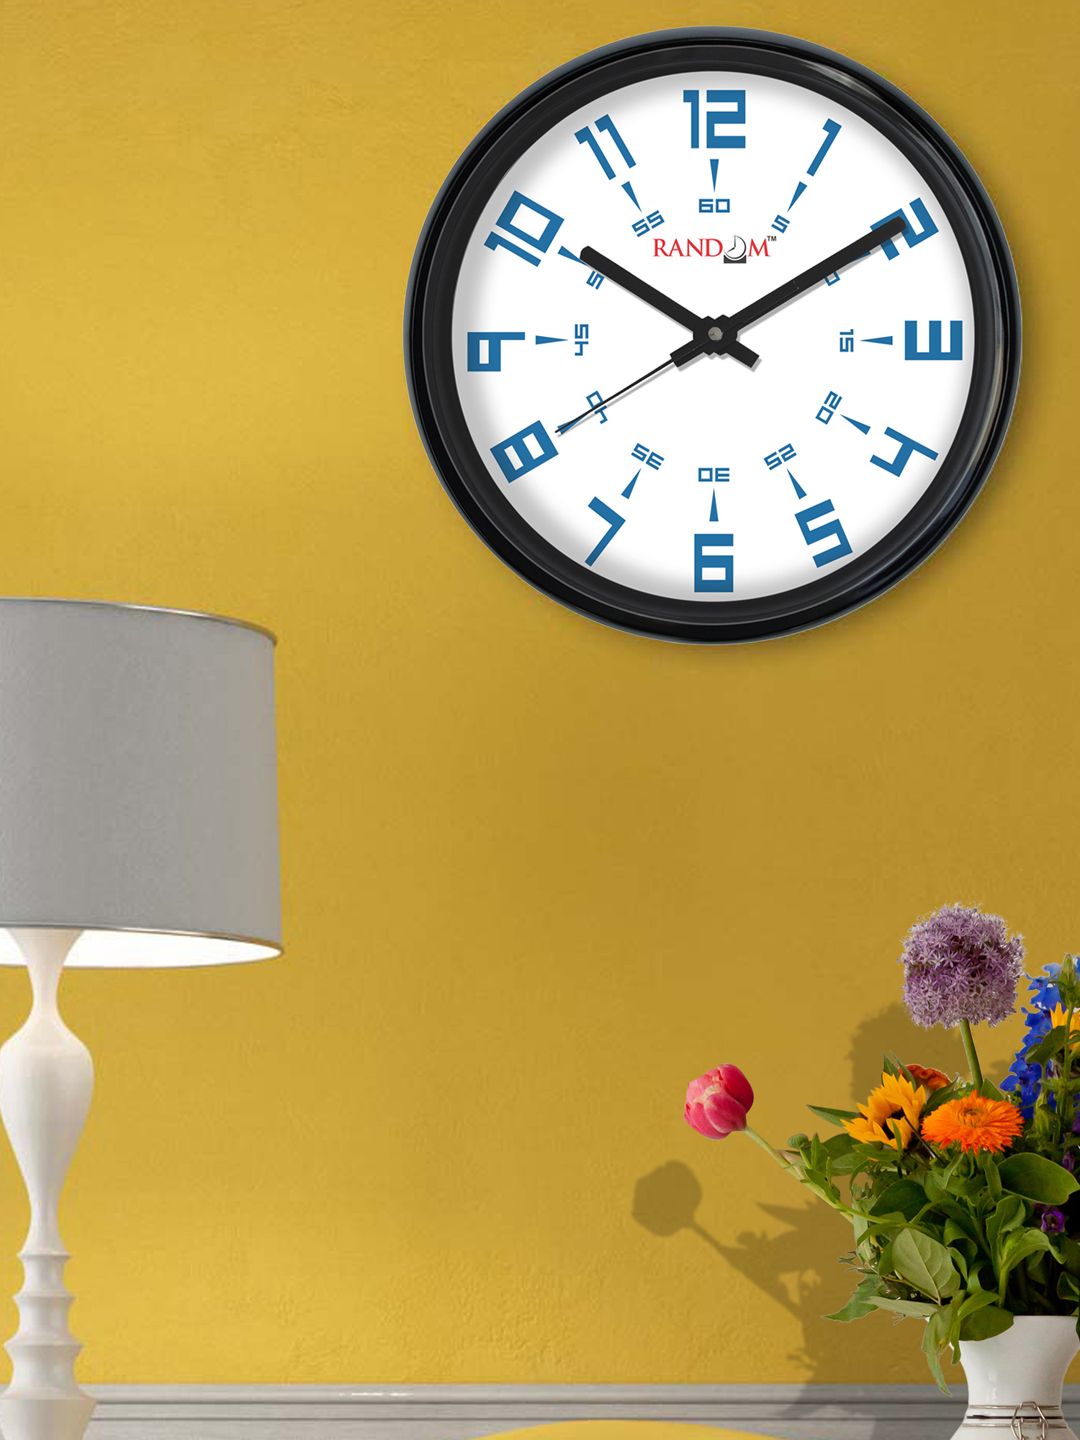 RANDOM White Round Solid Analogue Wall Clock Price in India